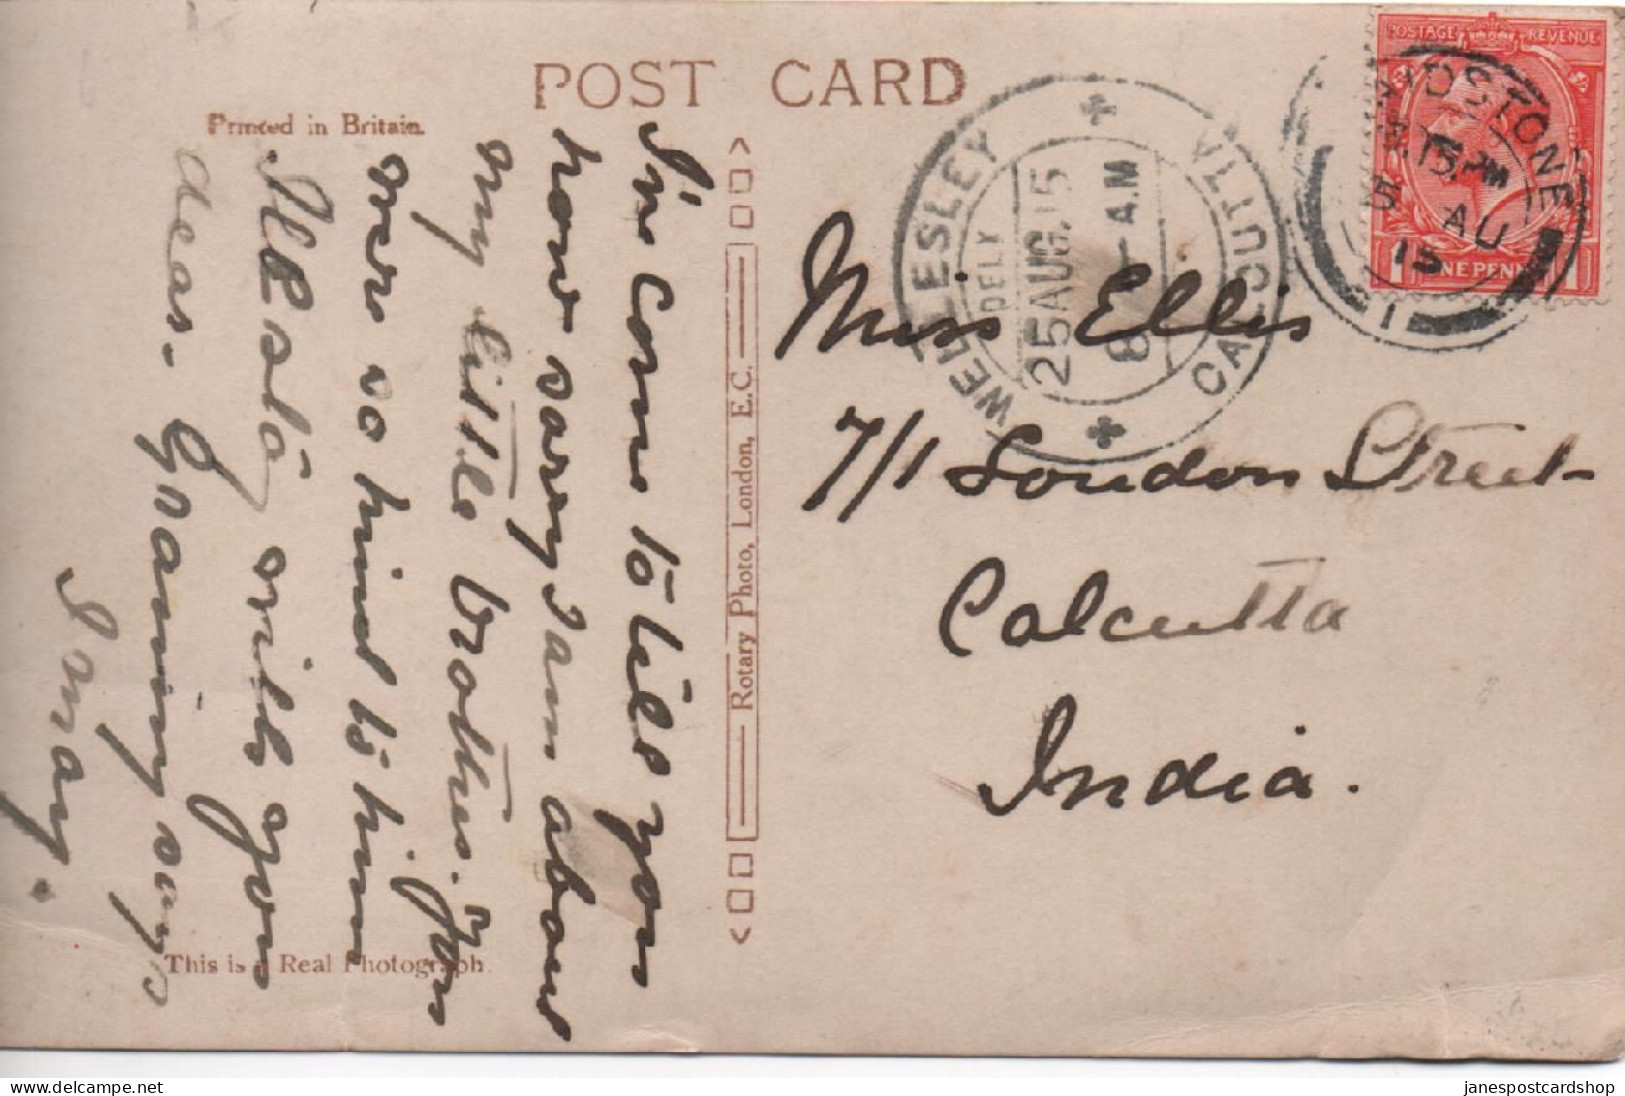 GOOD WELLESLEY CALCUTTA INDIA POSTMARK - ON REAL PHOTOGRAPHIC POSTCARD OF A CAT - Postcards